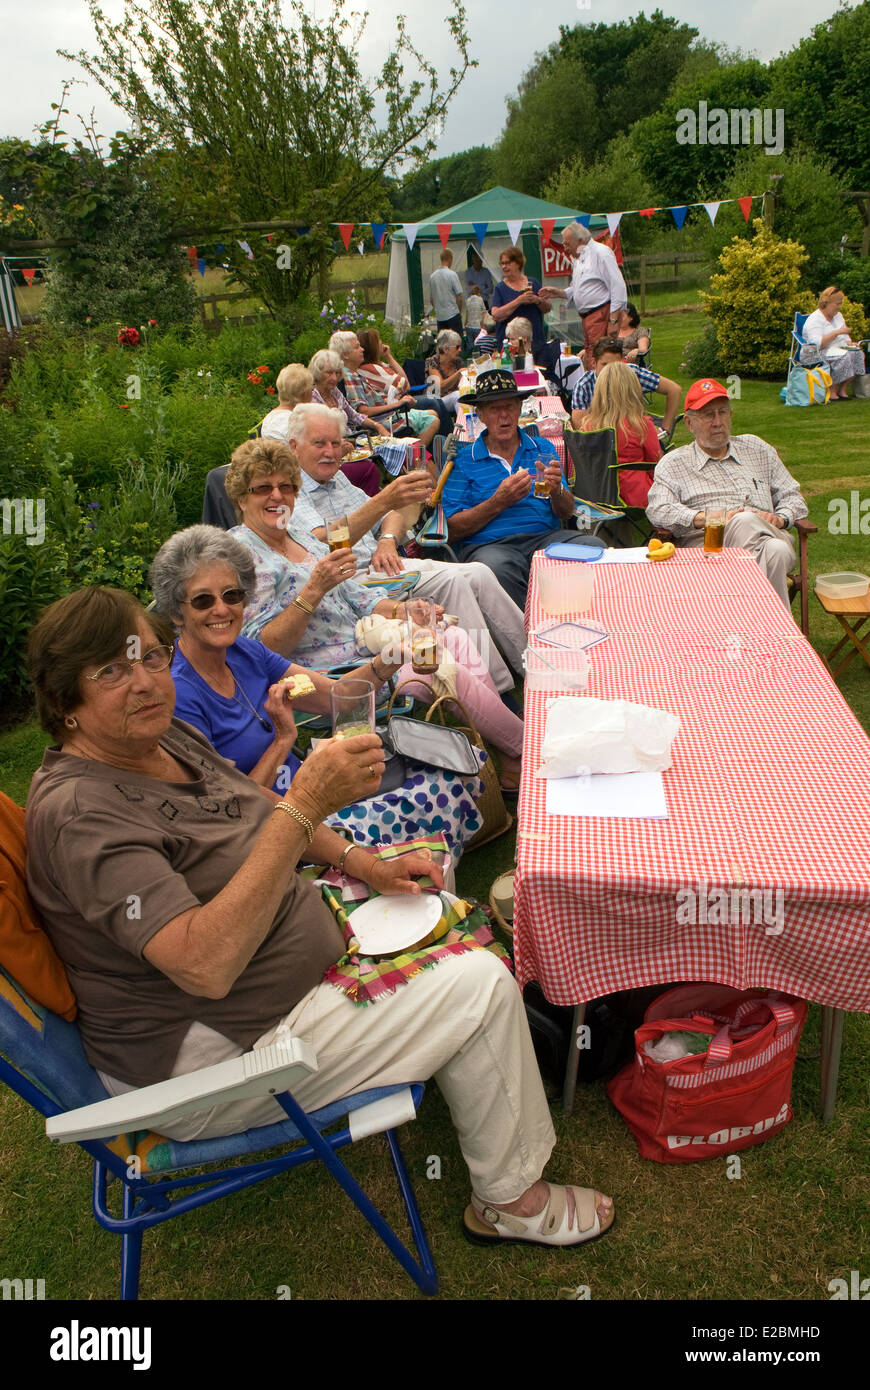 Group of elderly eople enjoying a glass of Pimms at a summer garden party, Standford, Hampshire, UK. Stock Photo